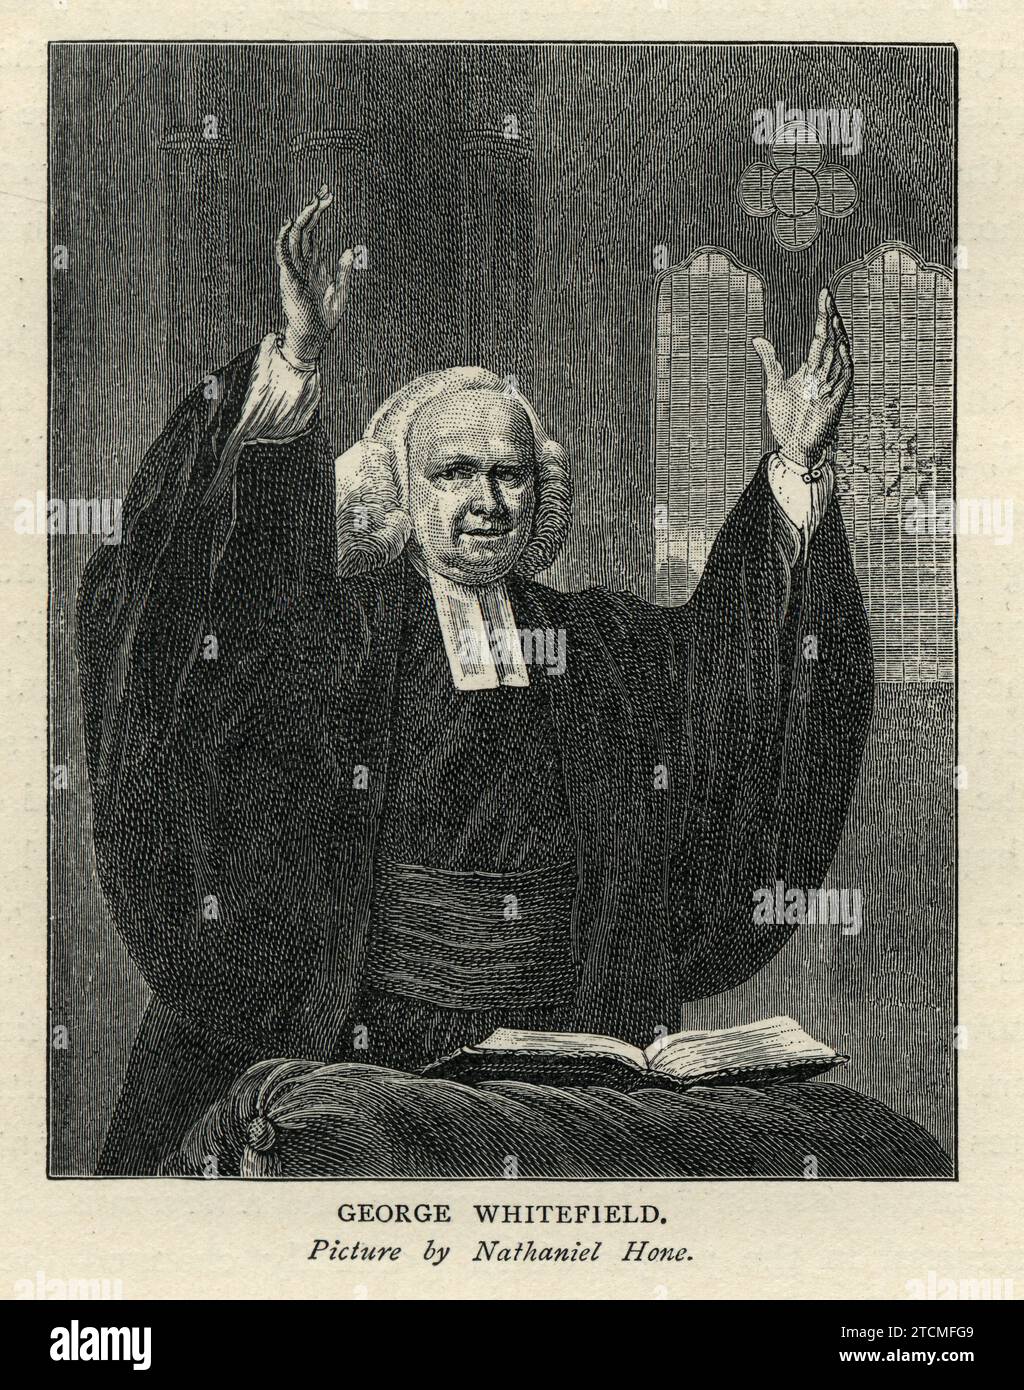 George Whitefield also known as George Whitfield, was an Anglican cleric and evangelist who was one of the founders of Methodism and the evangelical m Stock Photo